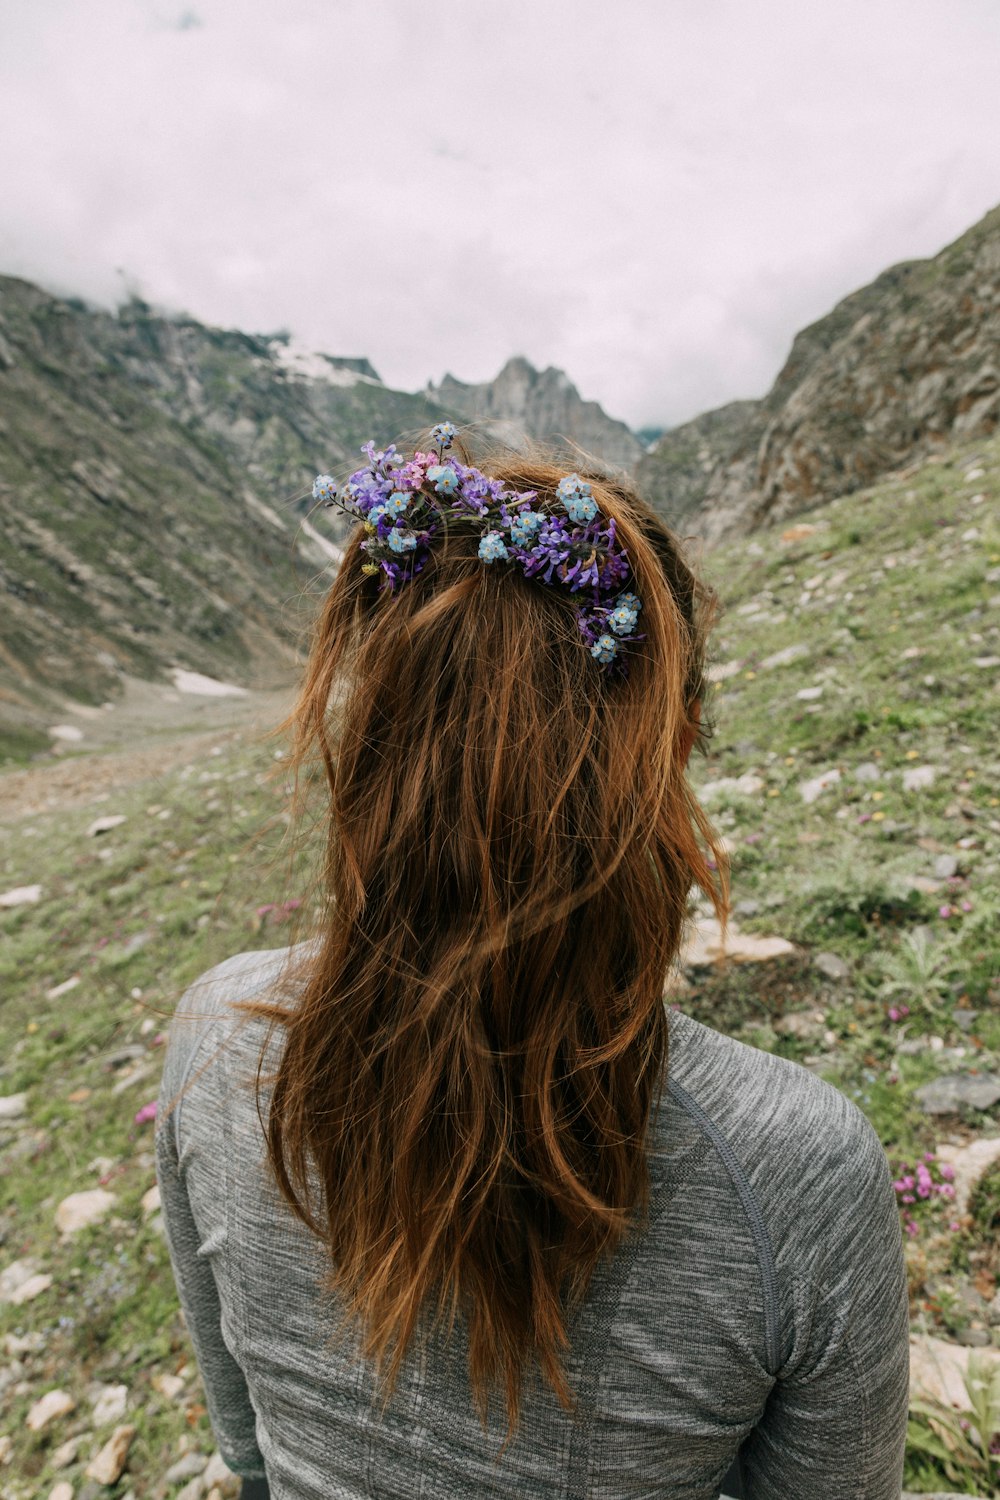 back view of woman with purple floral hairpiece